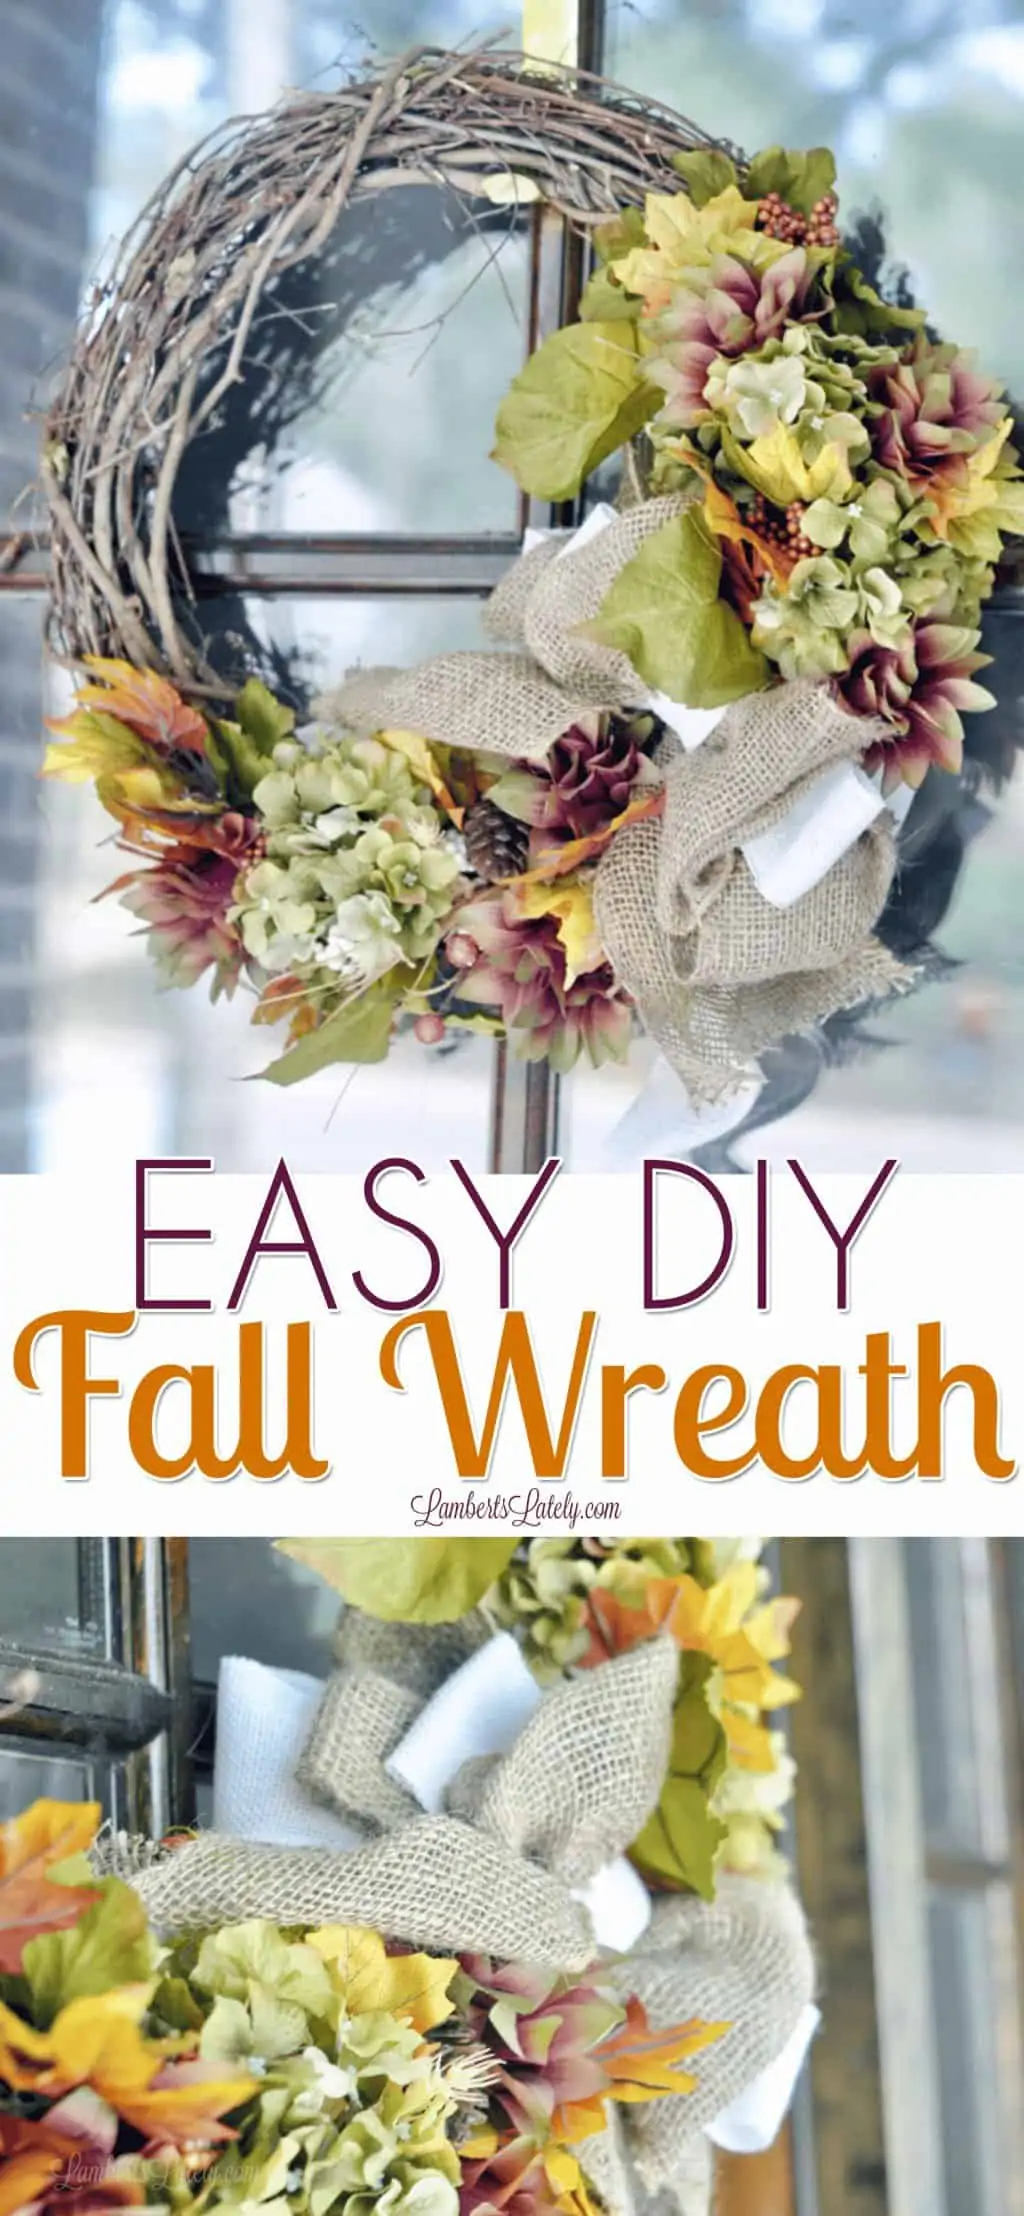 how to make a fall wreath - pinterest